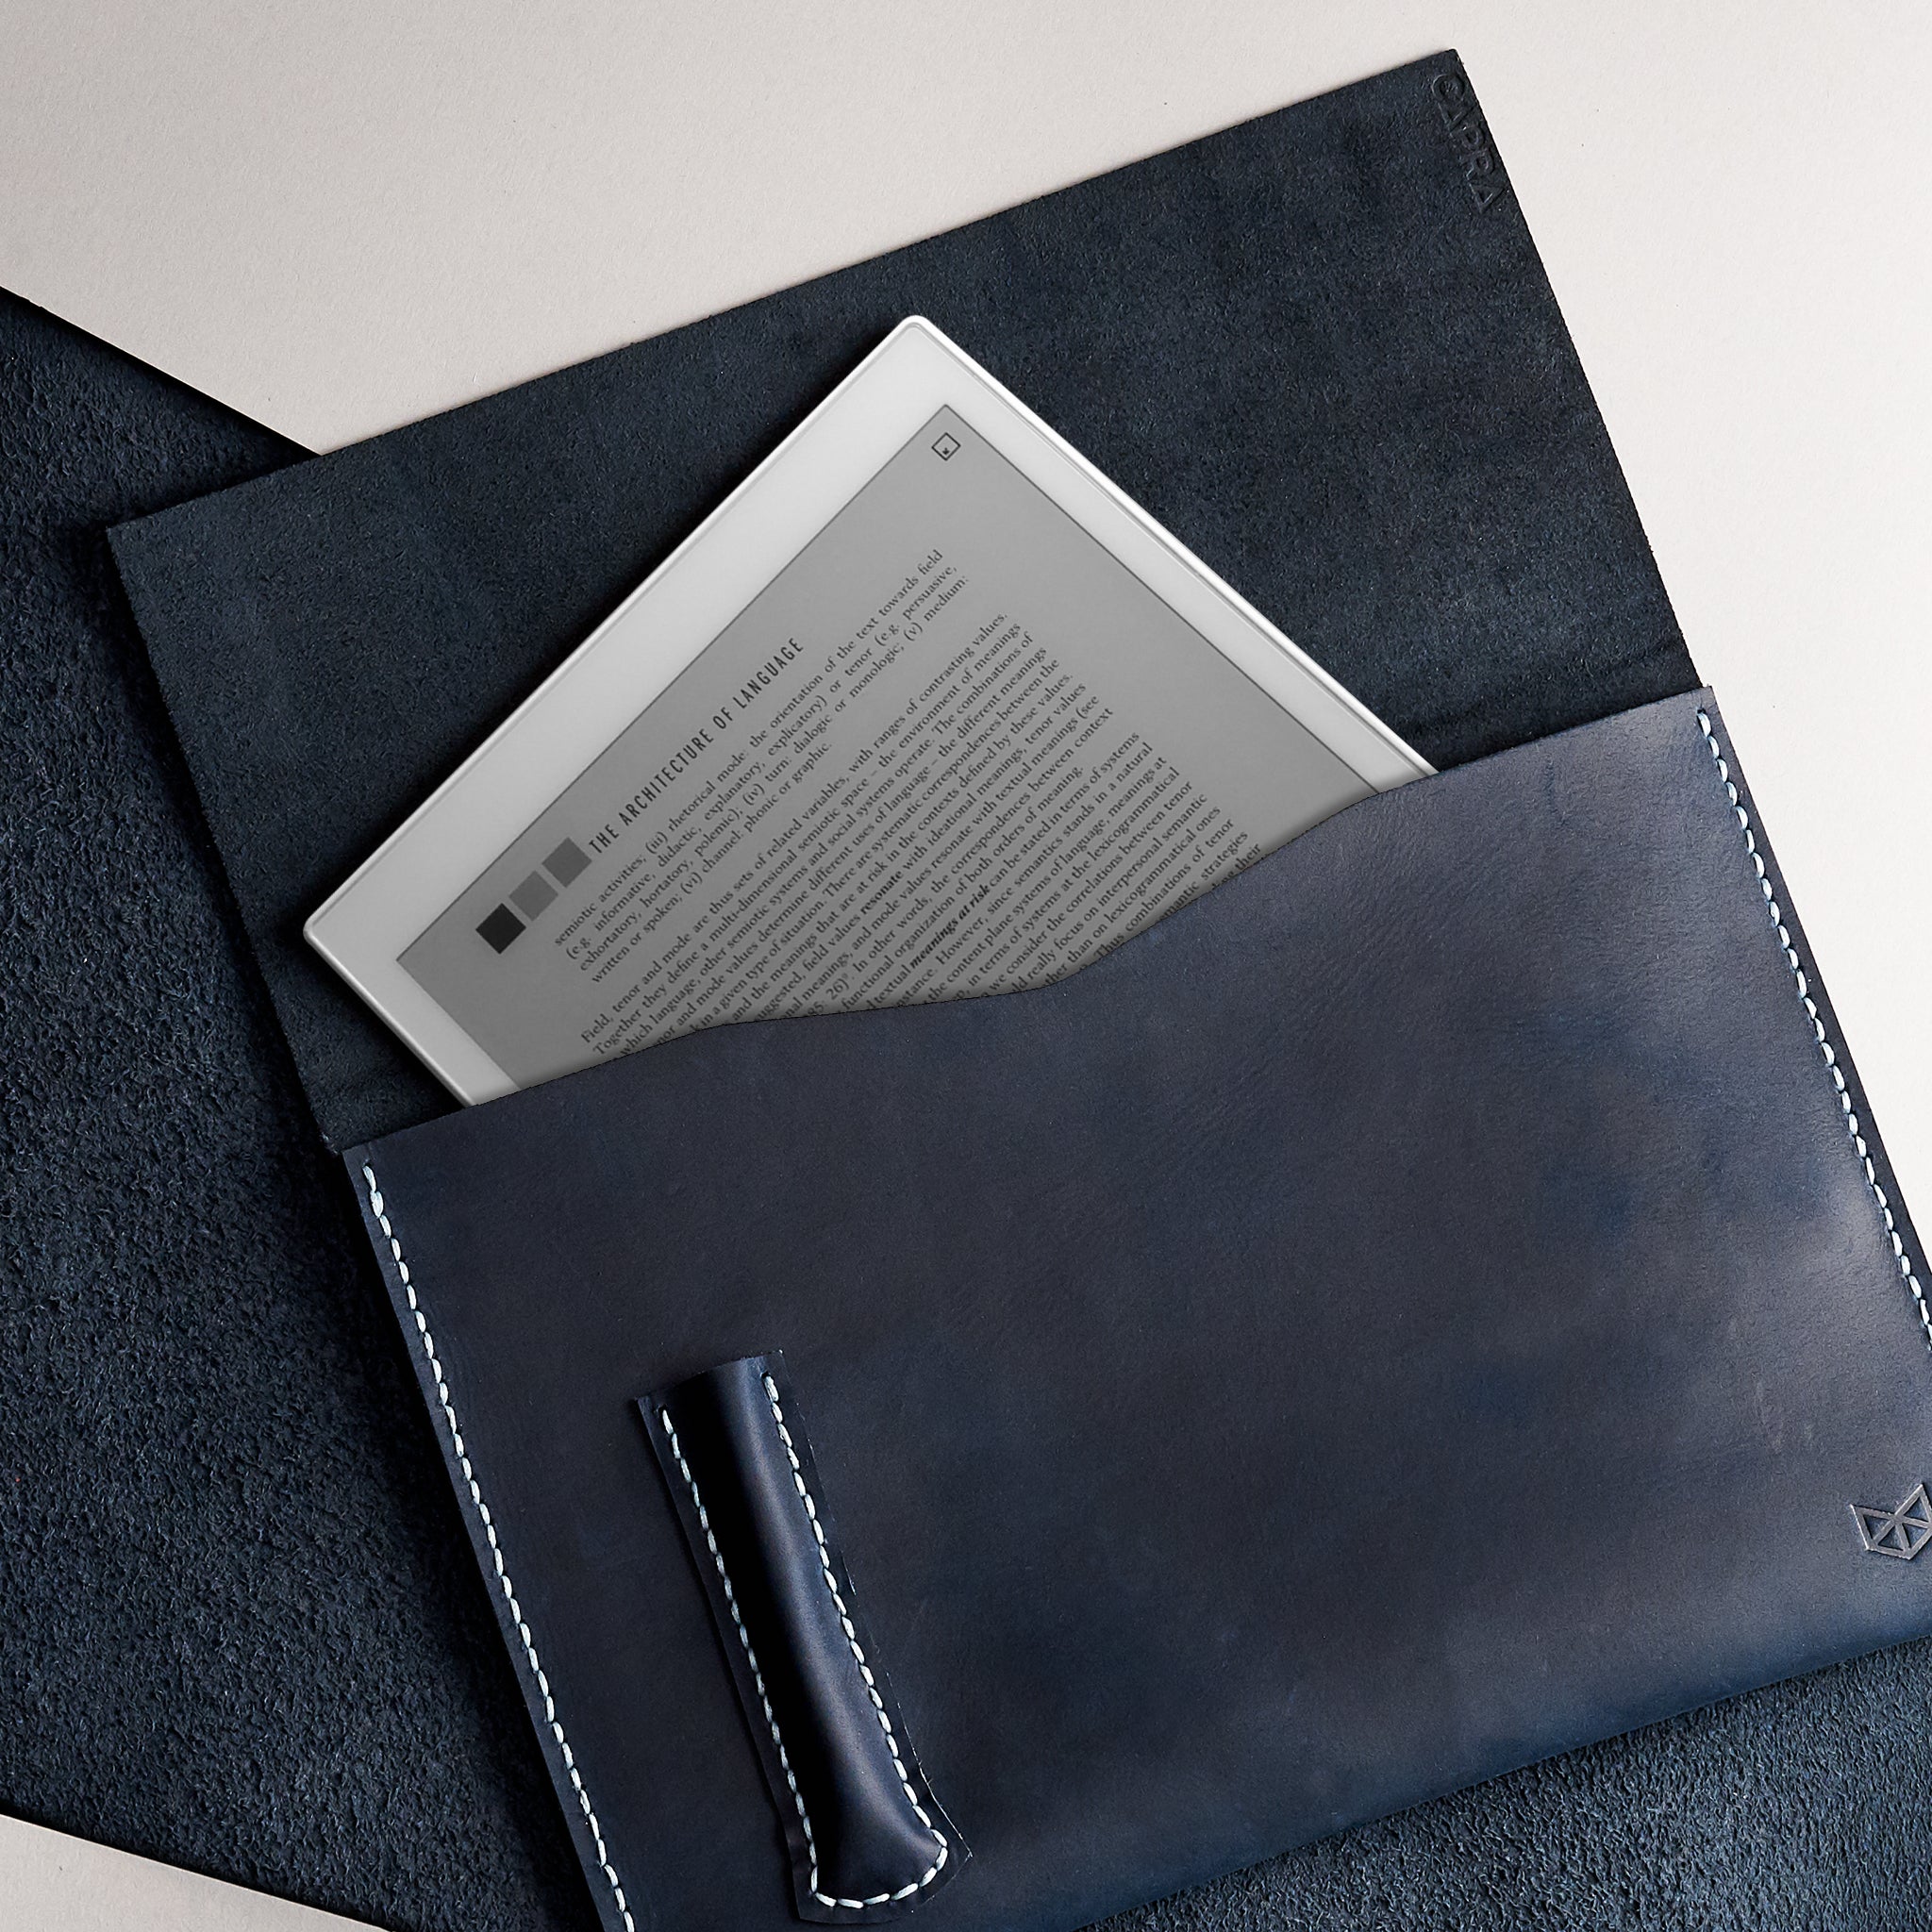 Handmade reMarkable Tablet Sleeve Case by Capra Leather